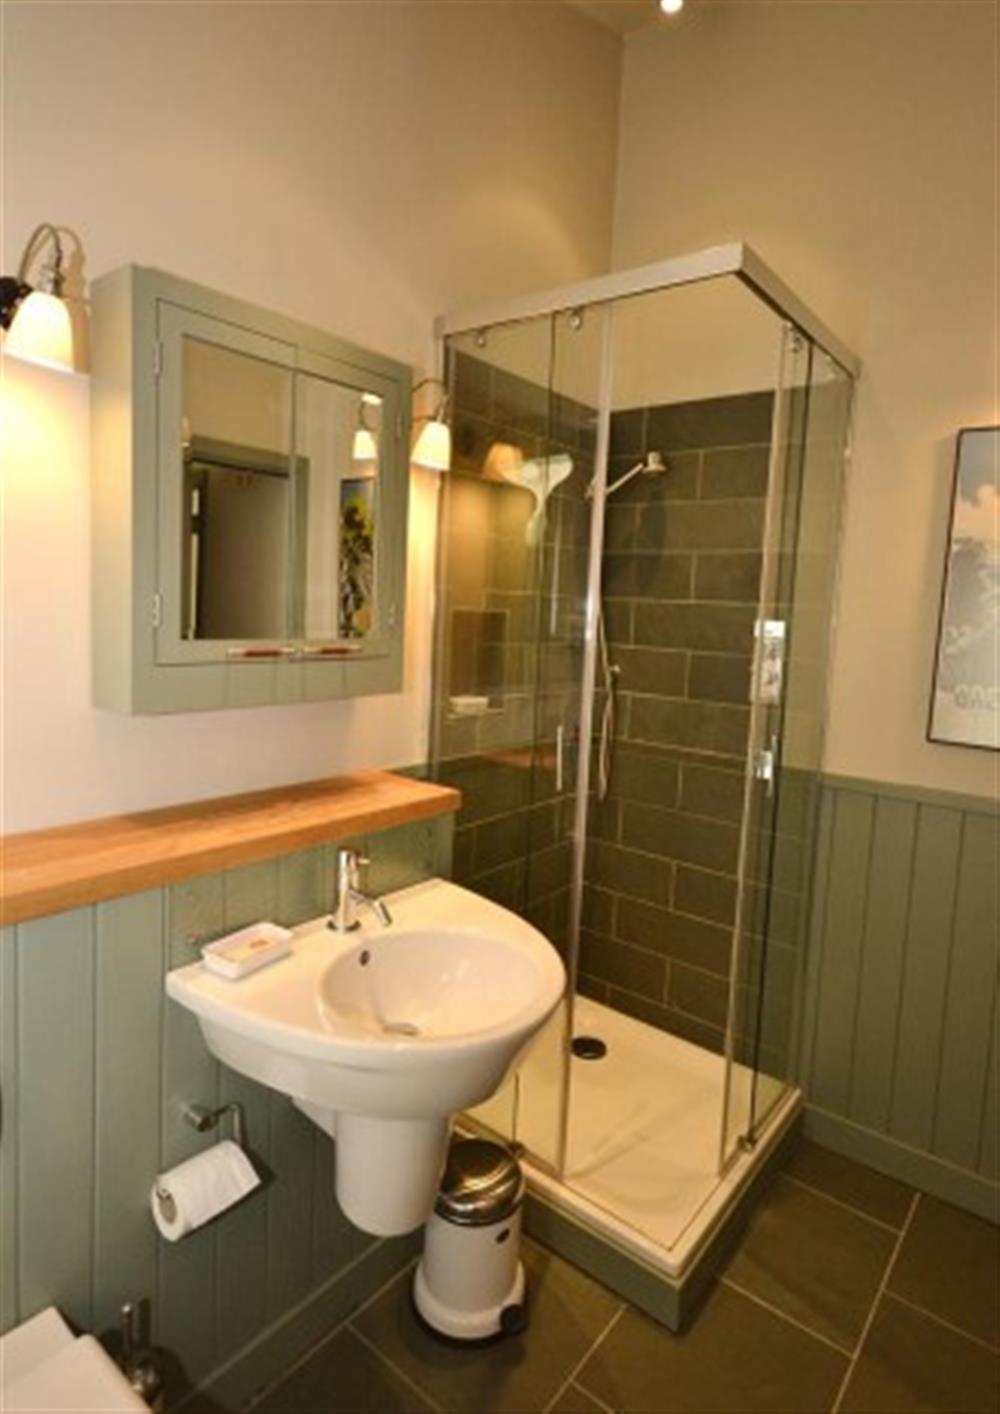 The master bedroom en-suite showing the shower cubicle at 39 Talland in Talland Bay